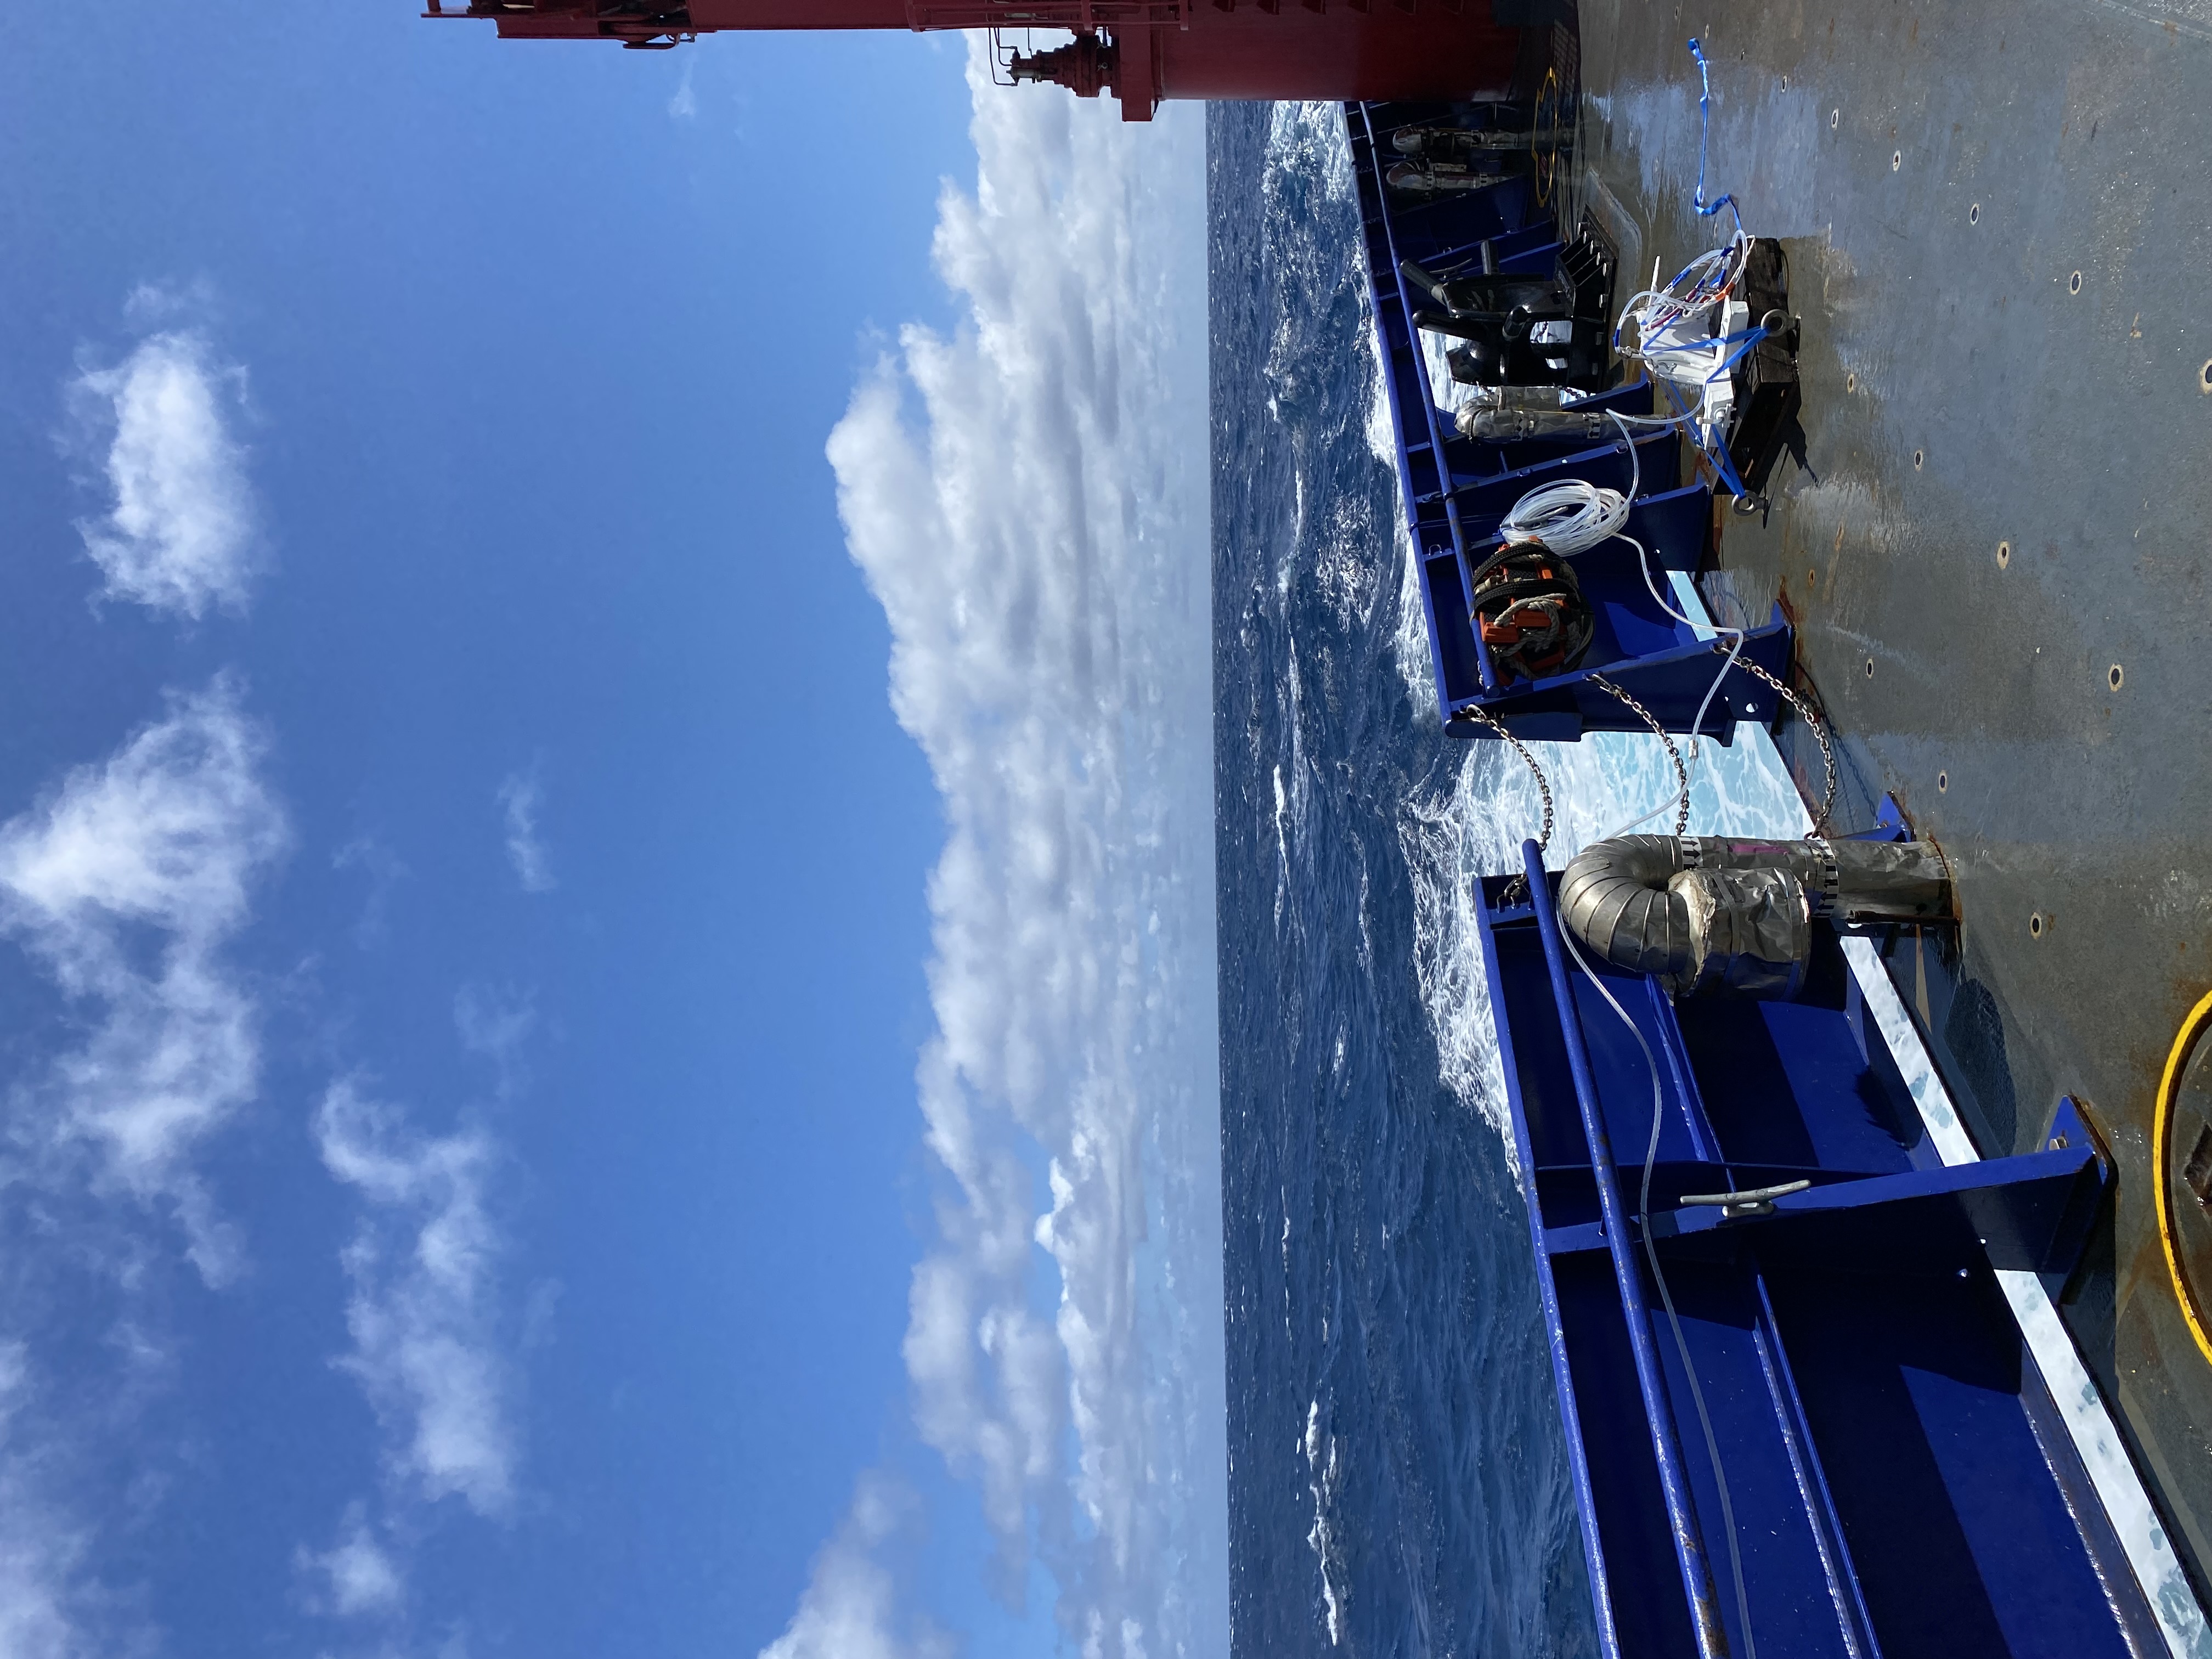 A typical view in the subtropical gyre – the bluest water I’ve ever seen!